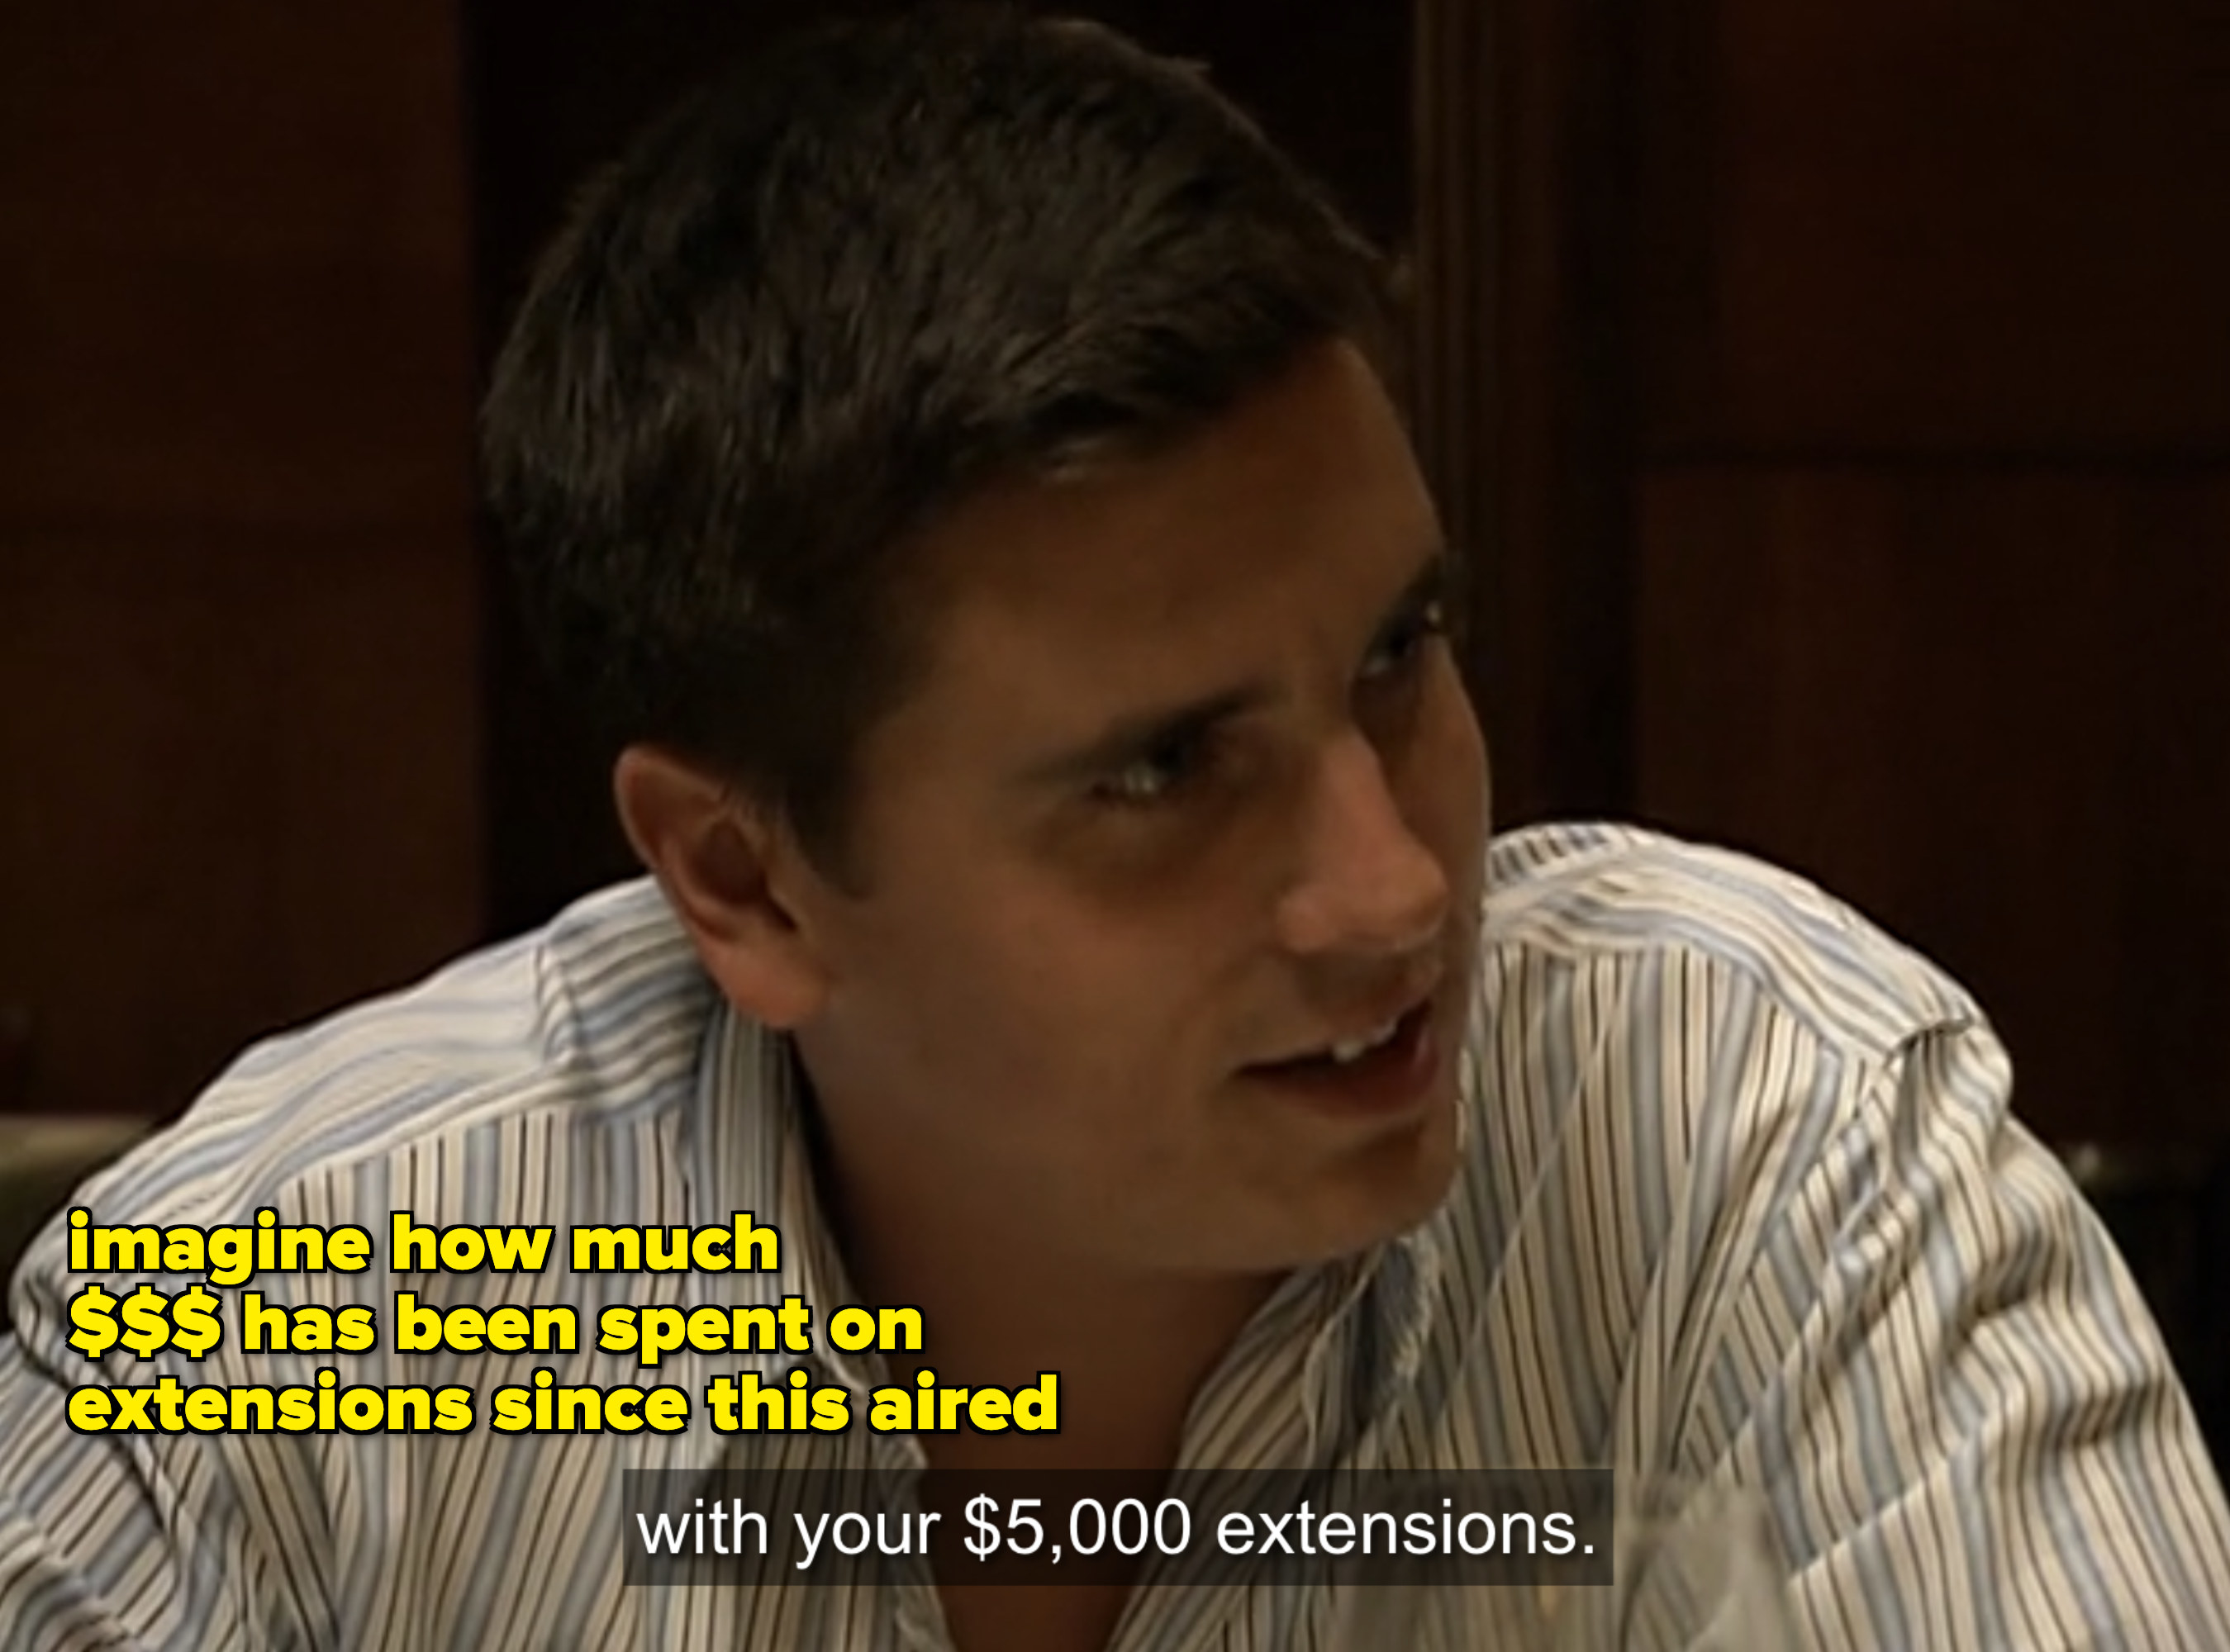 Scott: &quot;With your $5,000 extensions&quot;